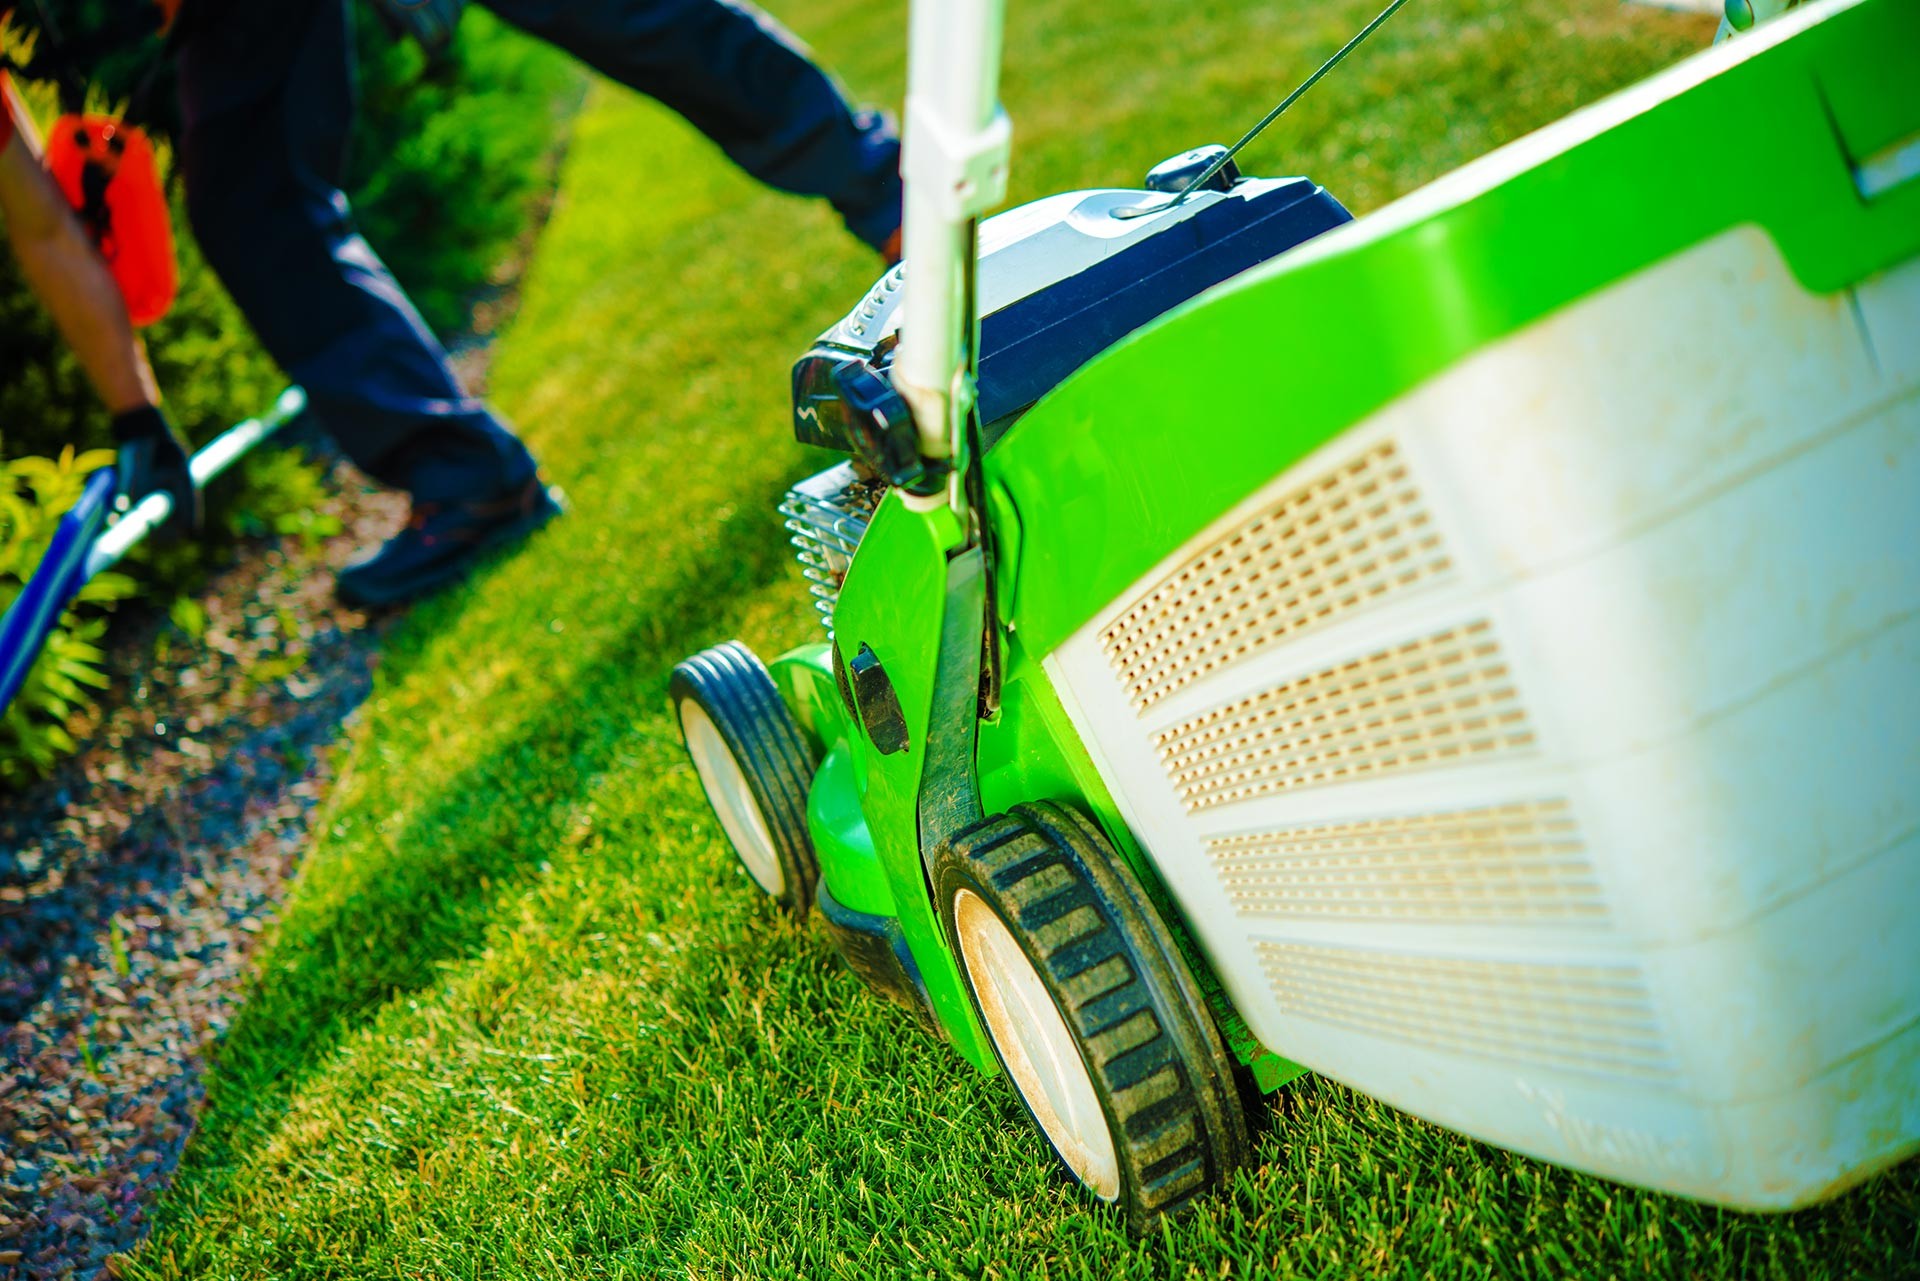 Lawn mowing and lawn care from one of our professional landscapers